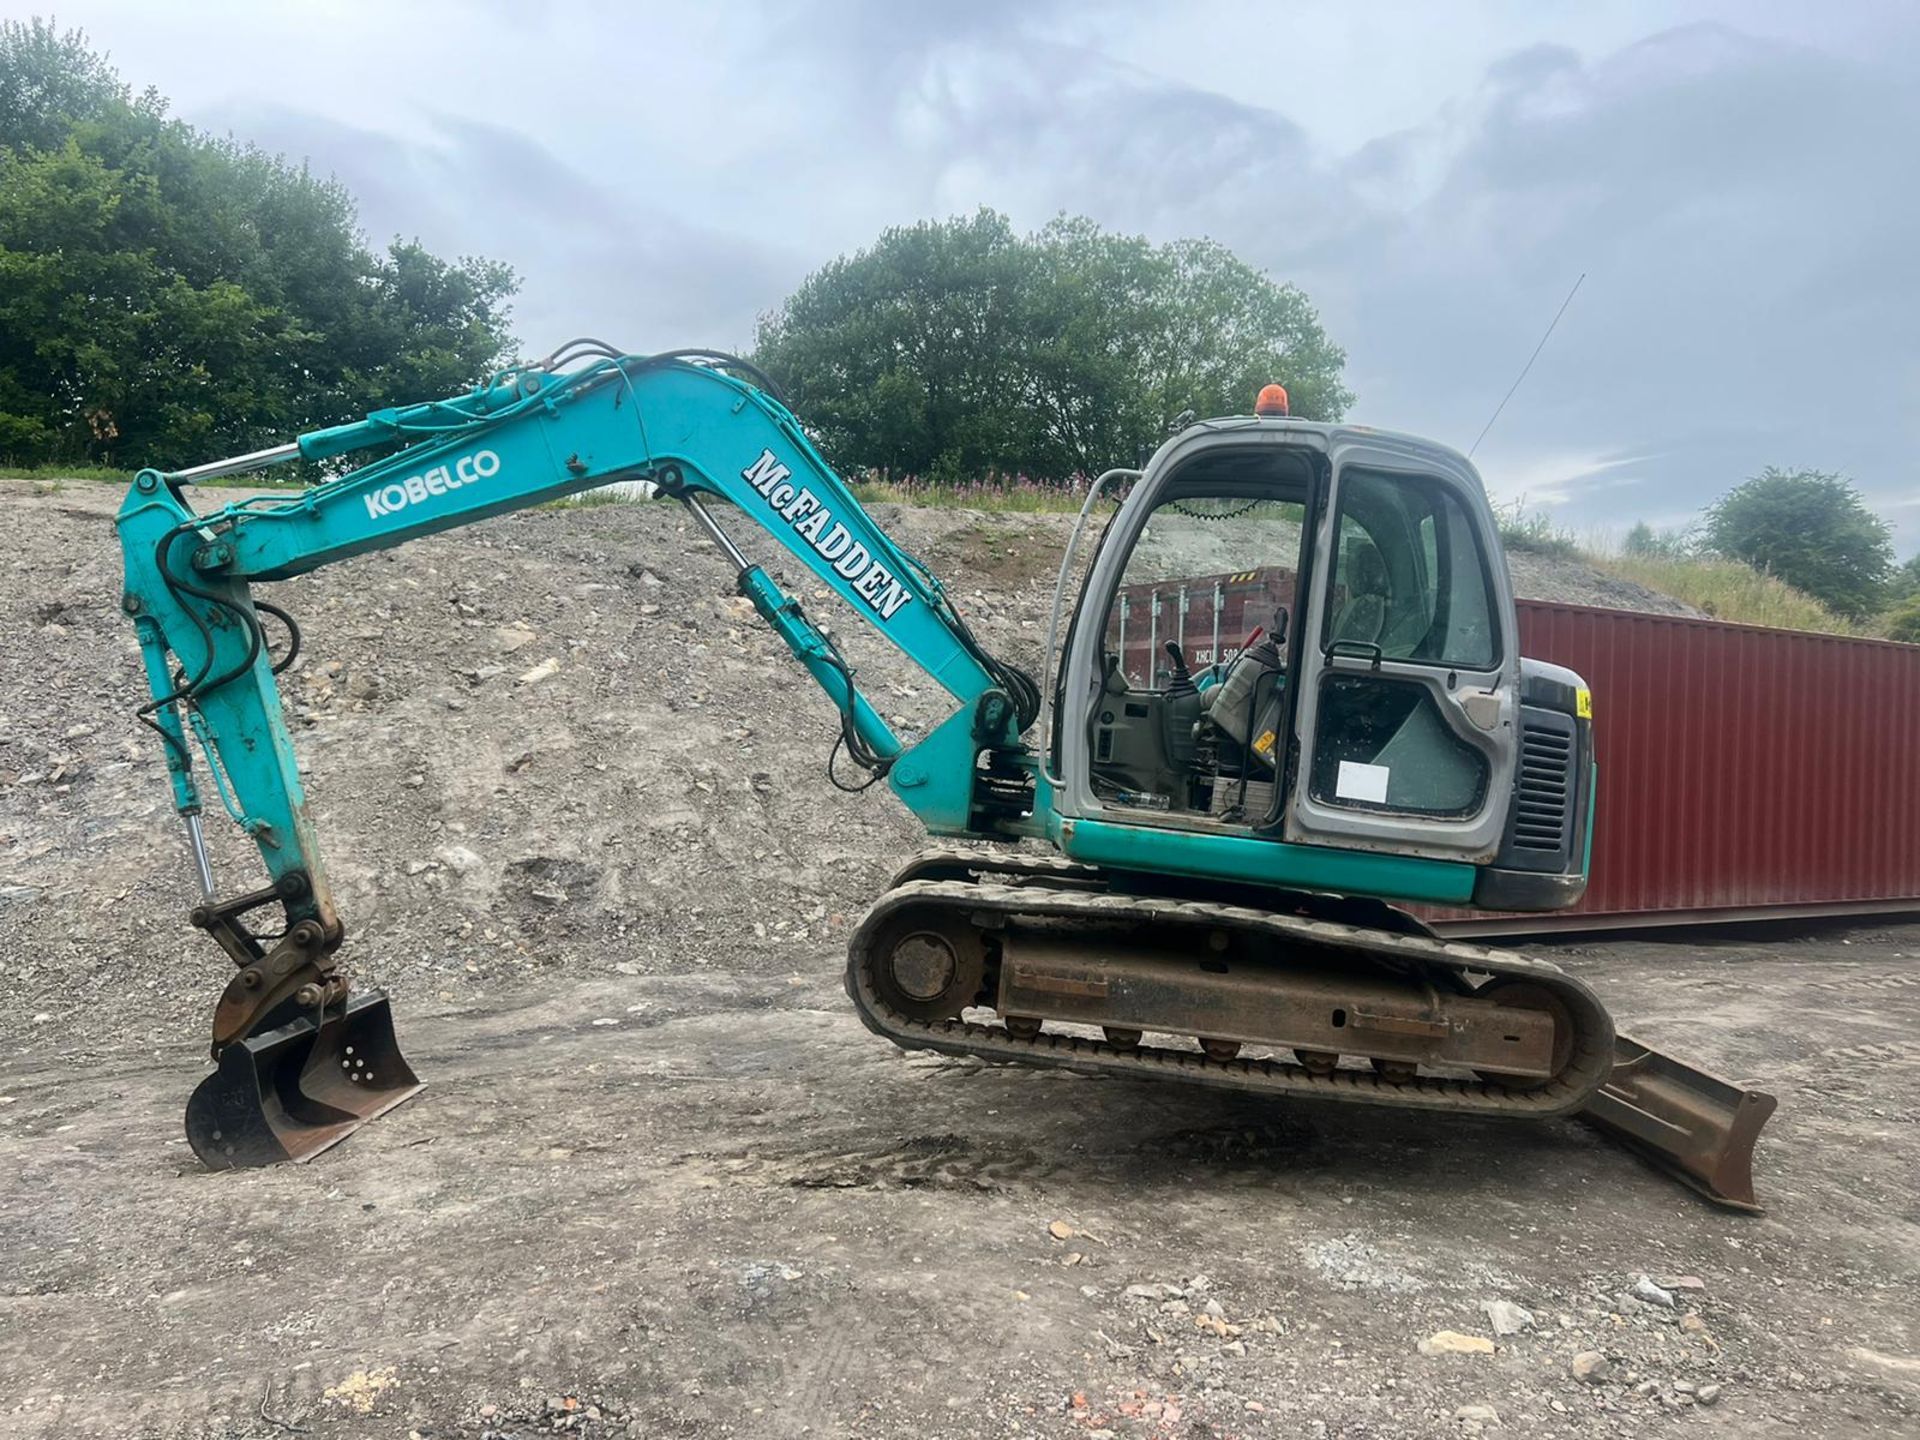 Kobelco 80MSR 8 Tonne Excavator With Blade, Runs Drives And Digs,Showing A Low 9117 Hours!*PLUS VAT* - Image 8 of 29